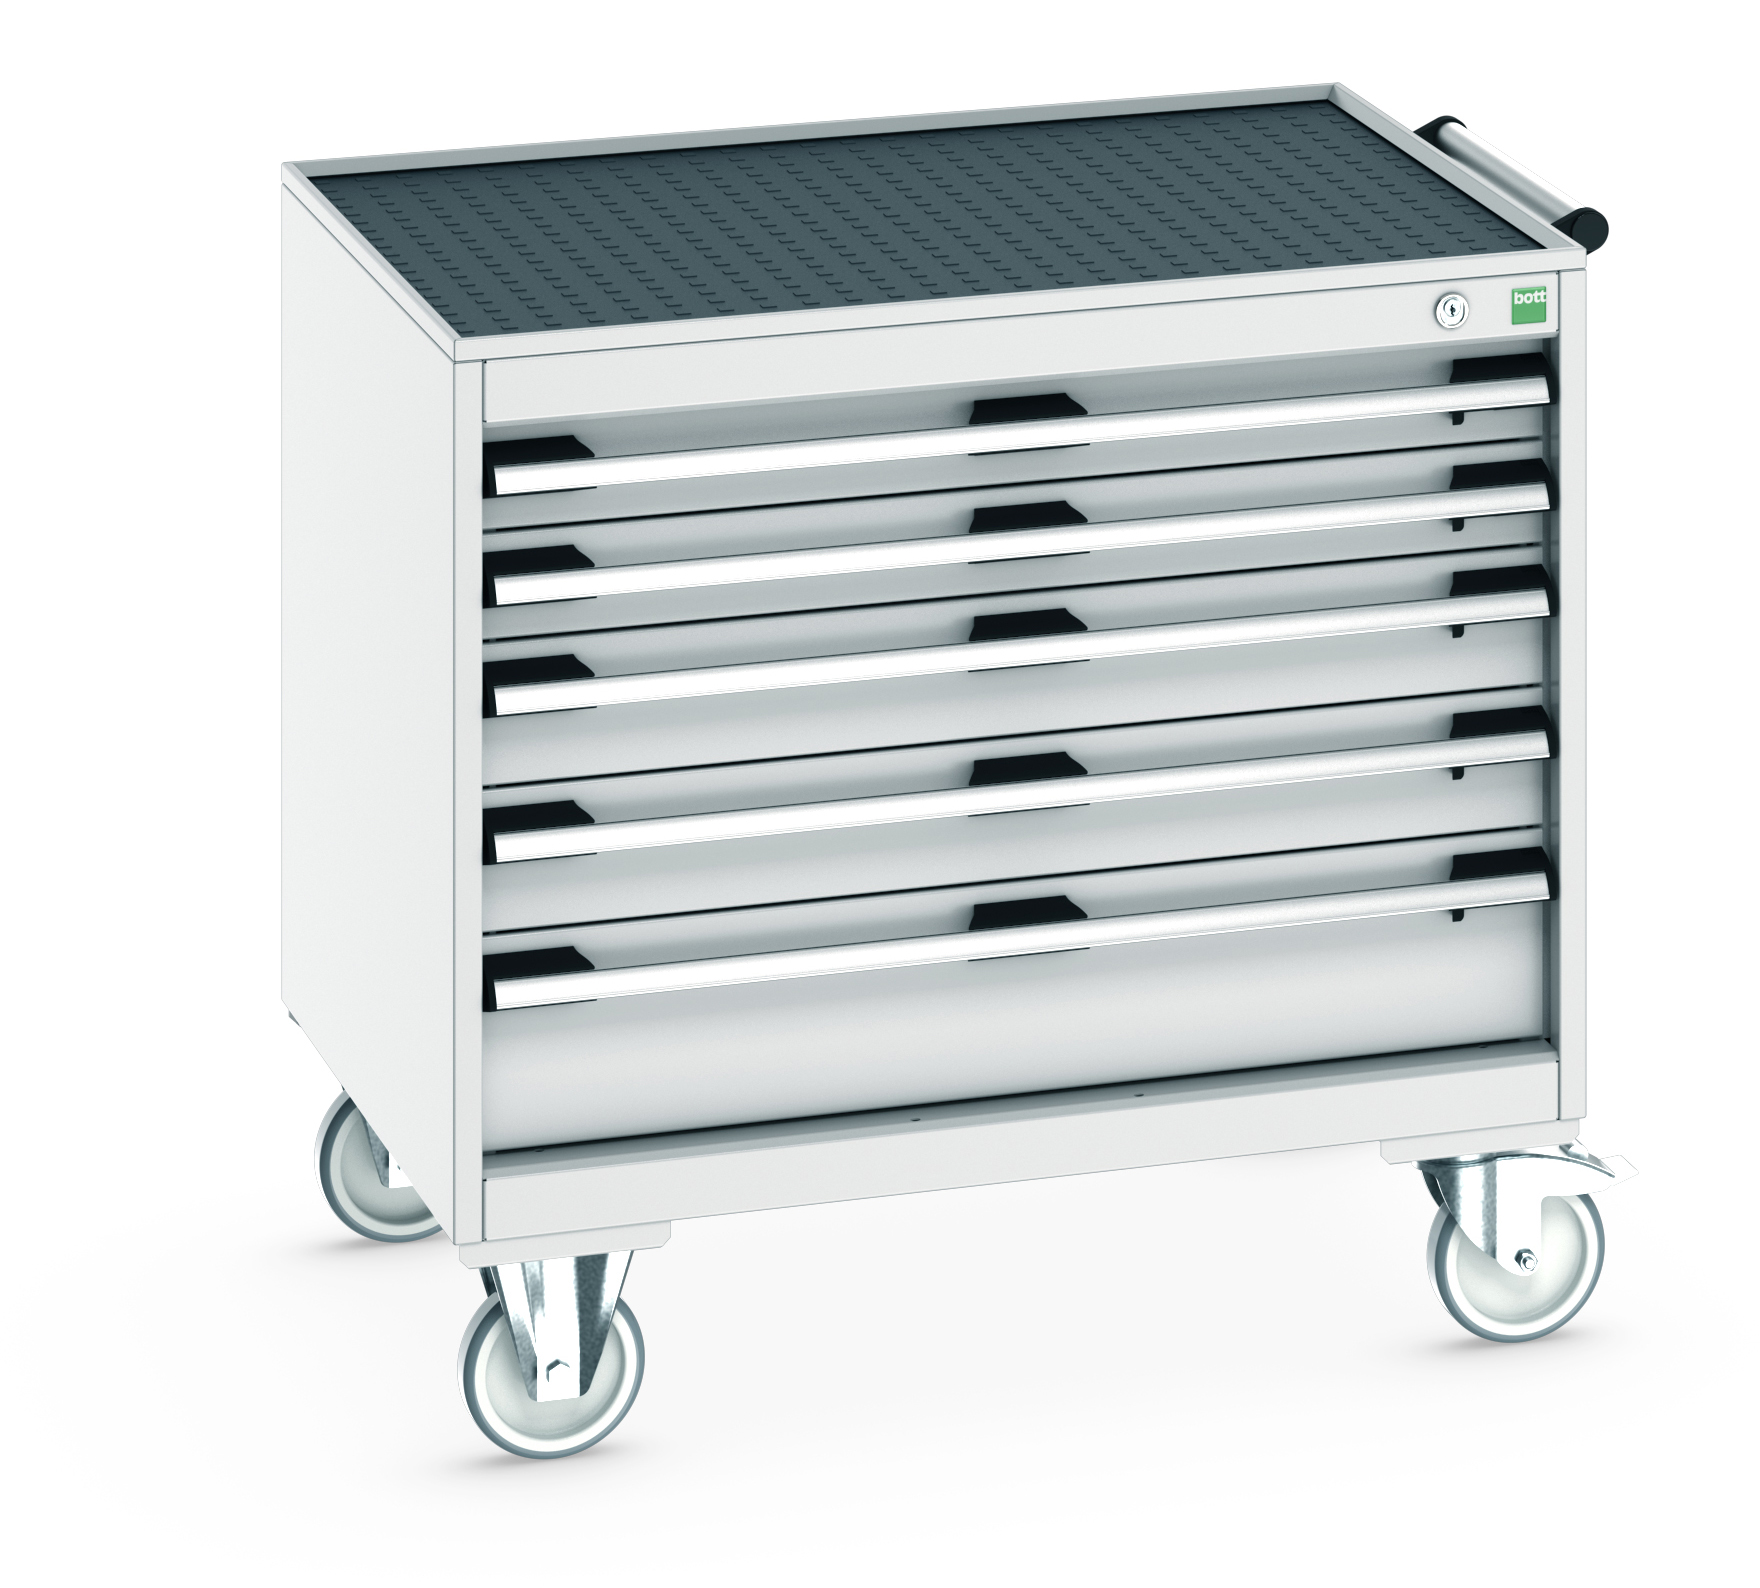 Bott Cubio Mobile Drawer Cabinet With 5 Drawers & Top Tray With Mat - 40402107.16V